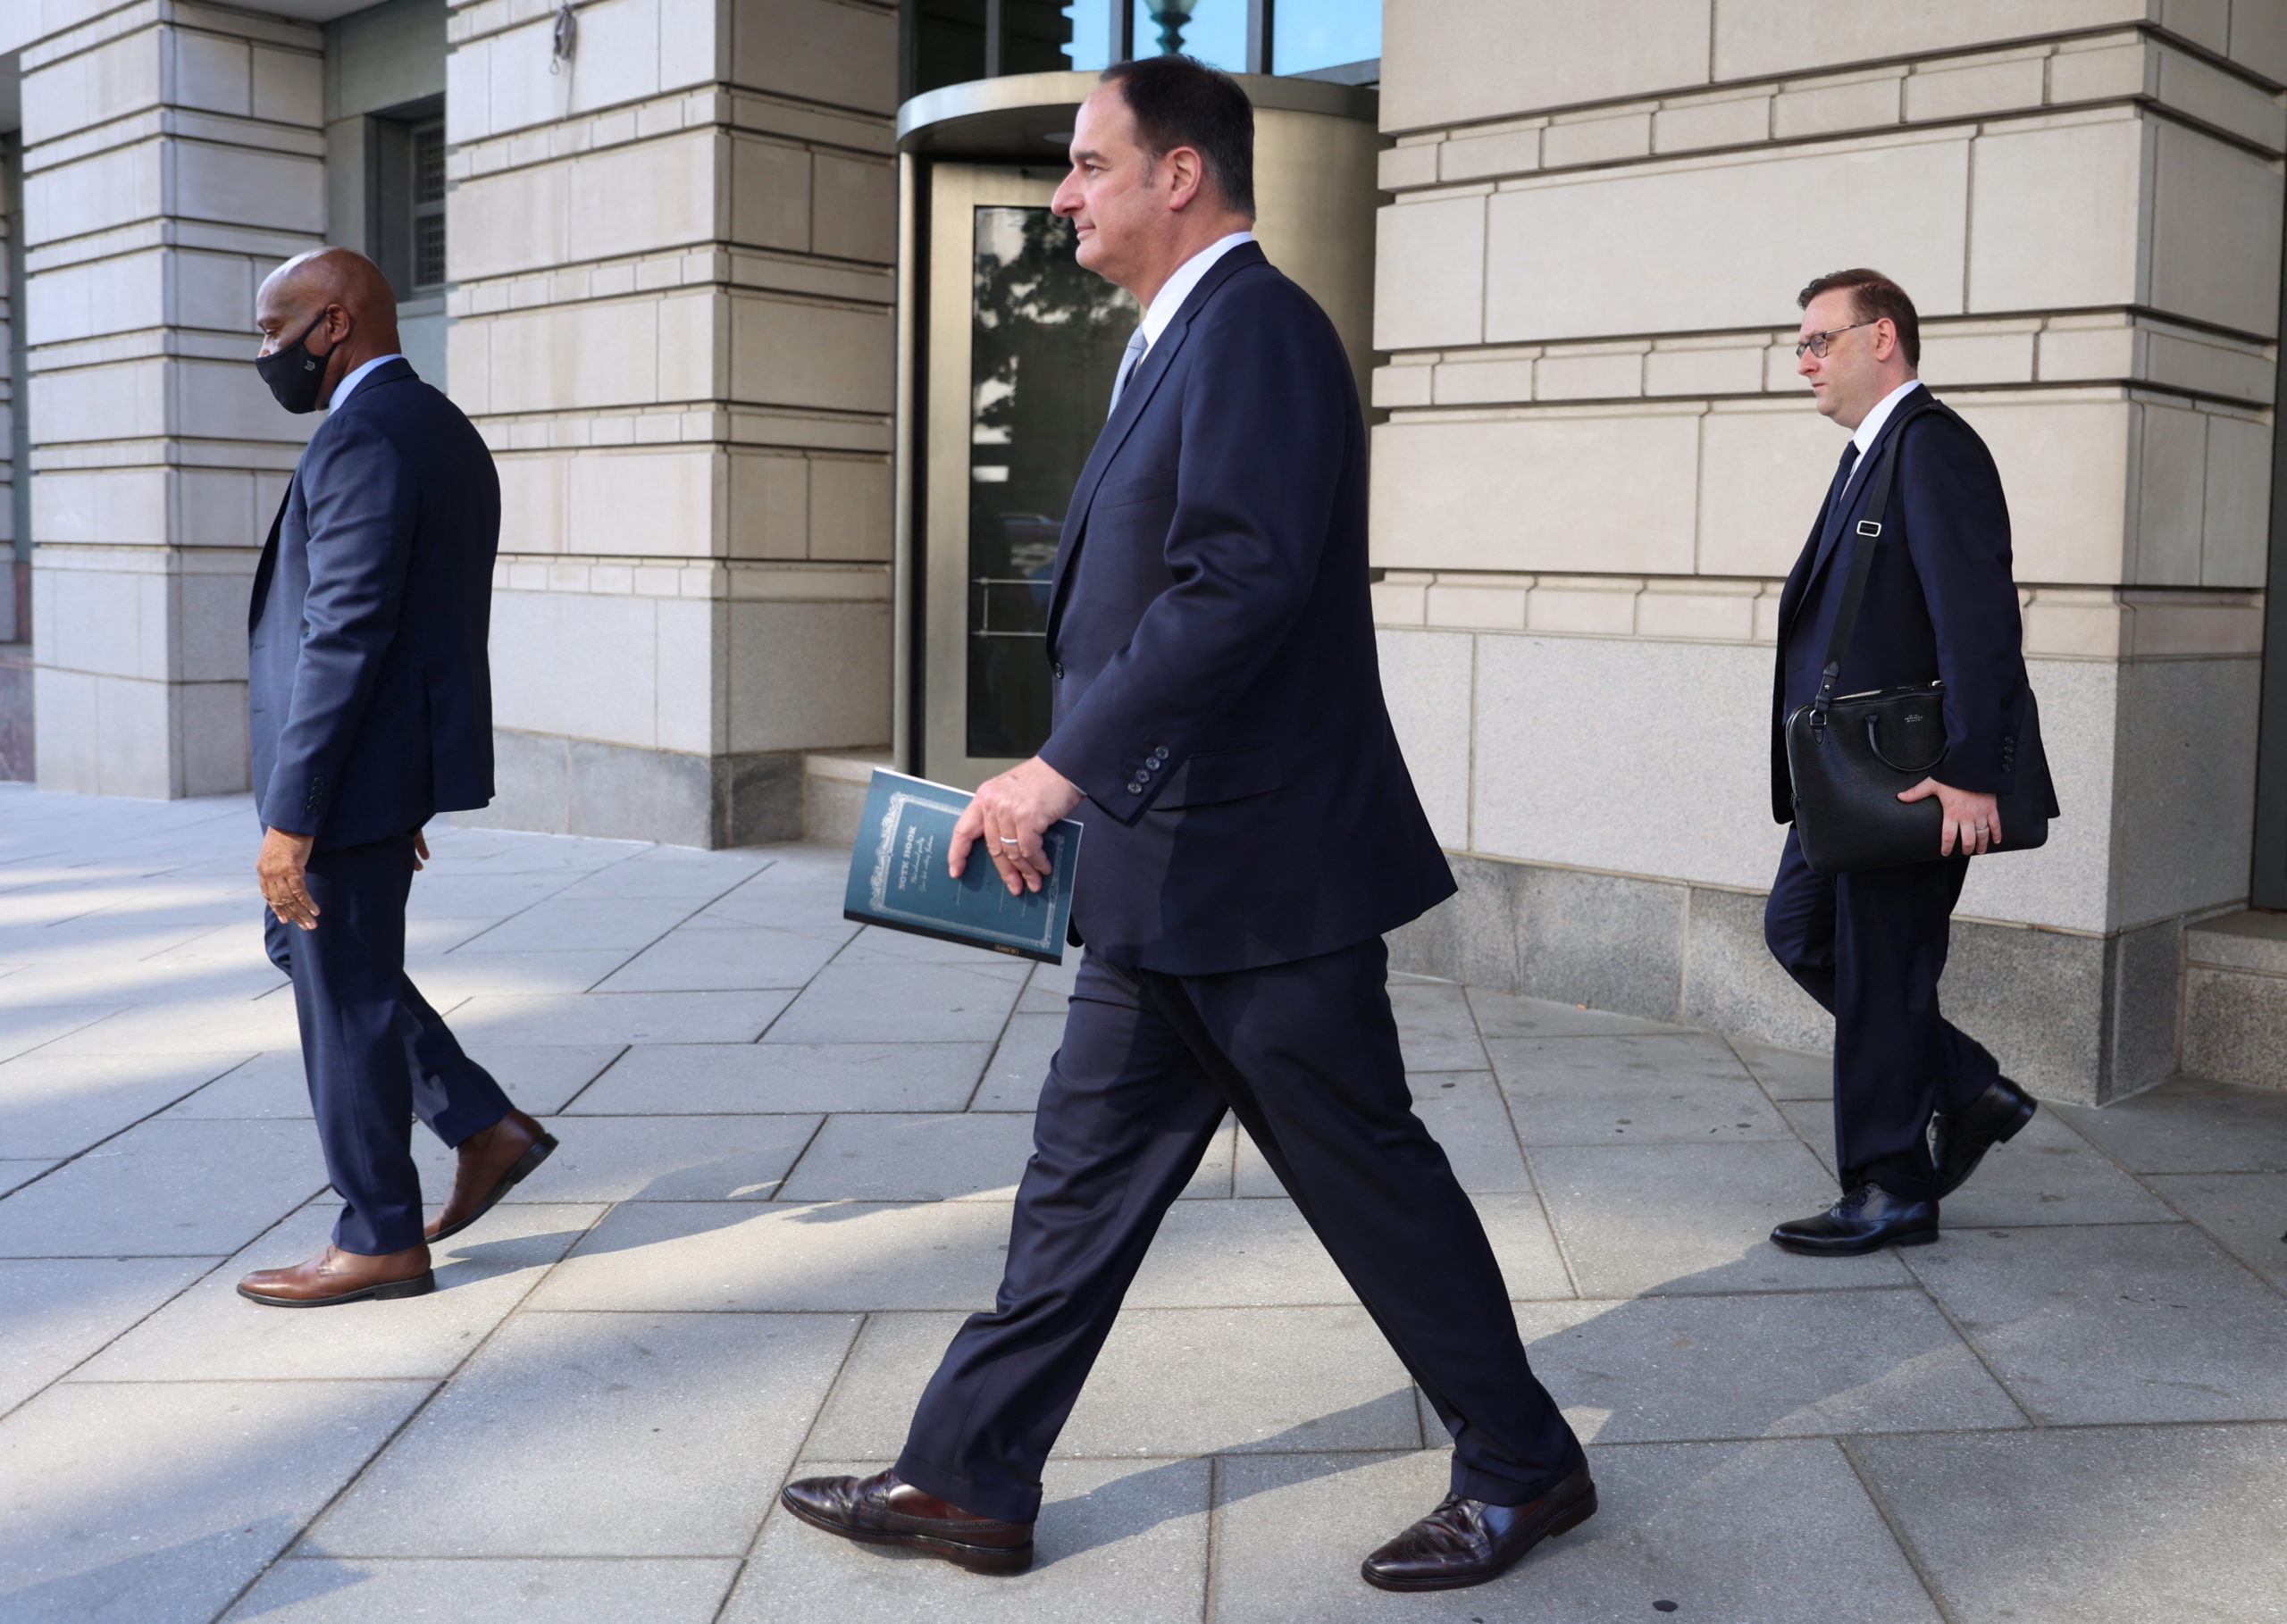 Attorney Michael Sussmann departs the U.S. Federal Courthouse after opening arguments in his trial, where Special Counsel John Durham is prosecuting Sussmann on charges that he lied to the Federal Bureau of Investigation (FBI) while providing information about possible and later discredited allegations of communications between the 2016 presidential campaign of former U.S. President Donald Trump and Russia, in Washington, U.S. May 17, 2022. REUTERS/Julia Nikhinson